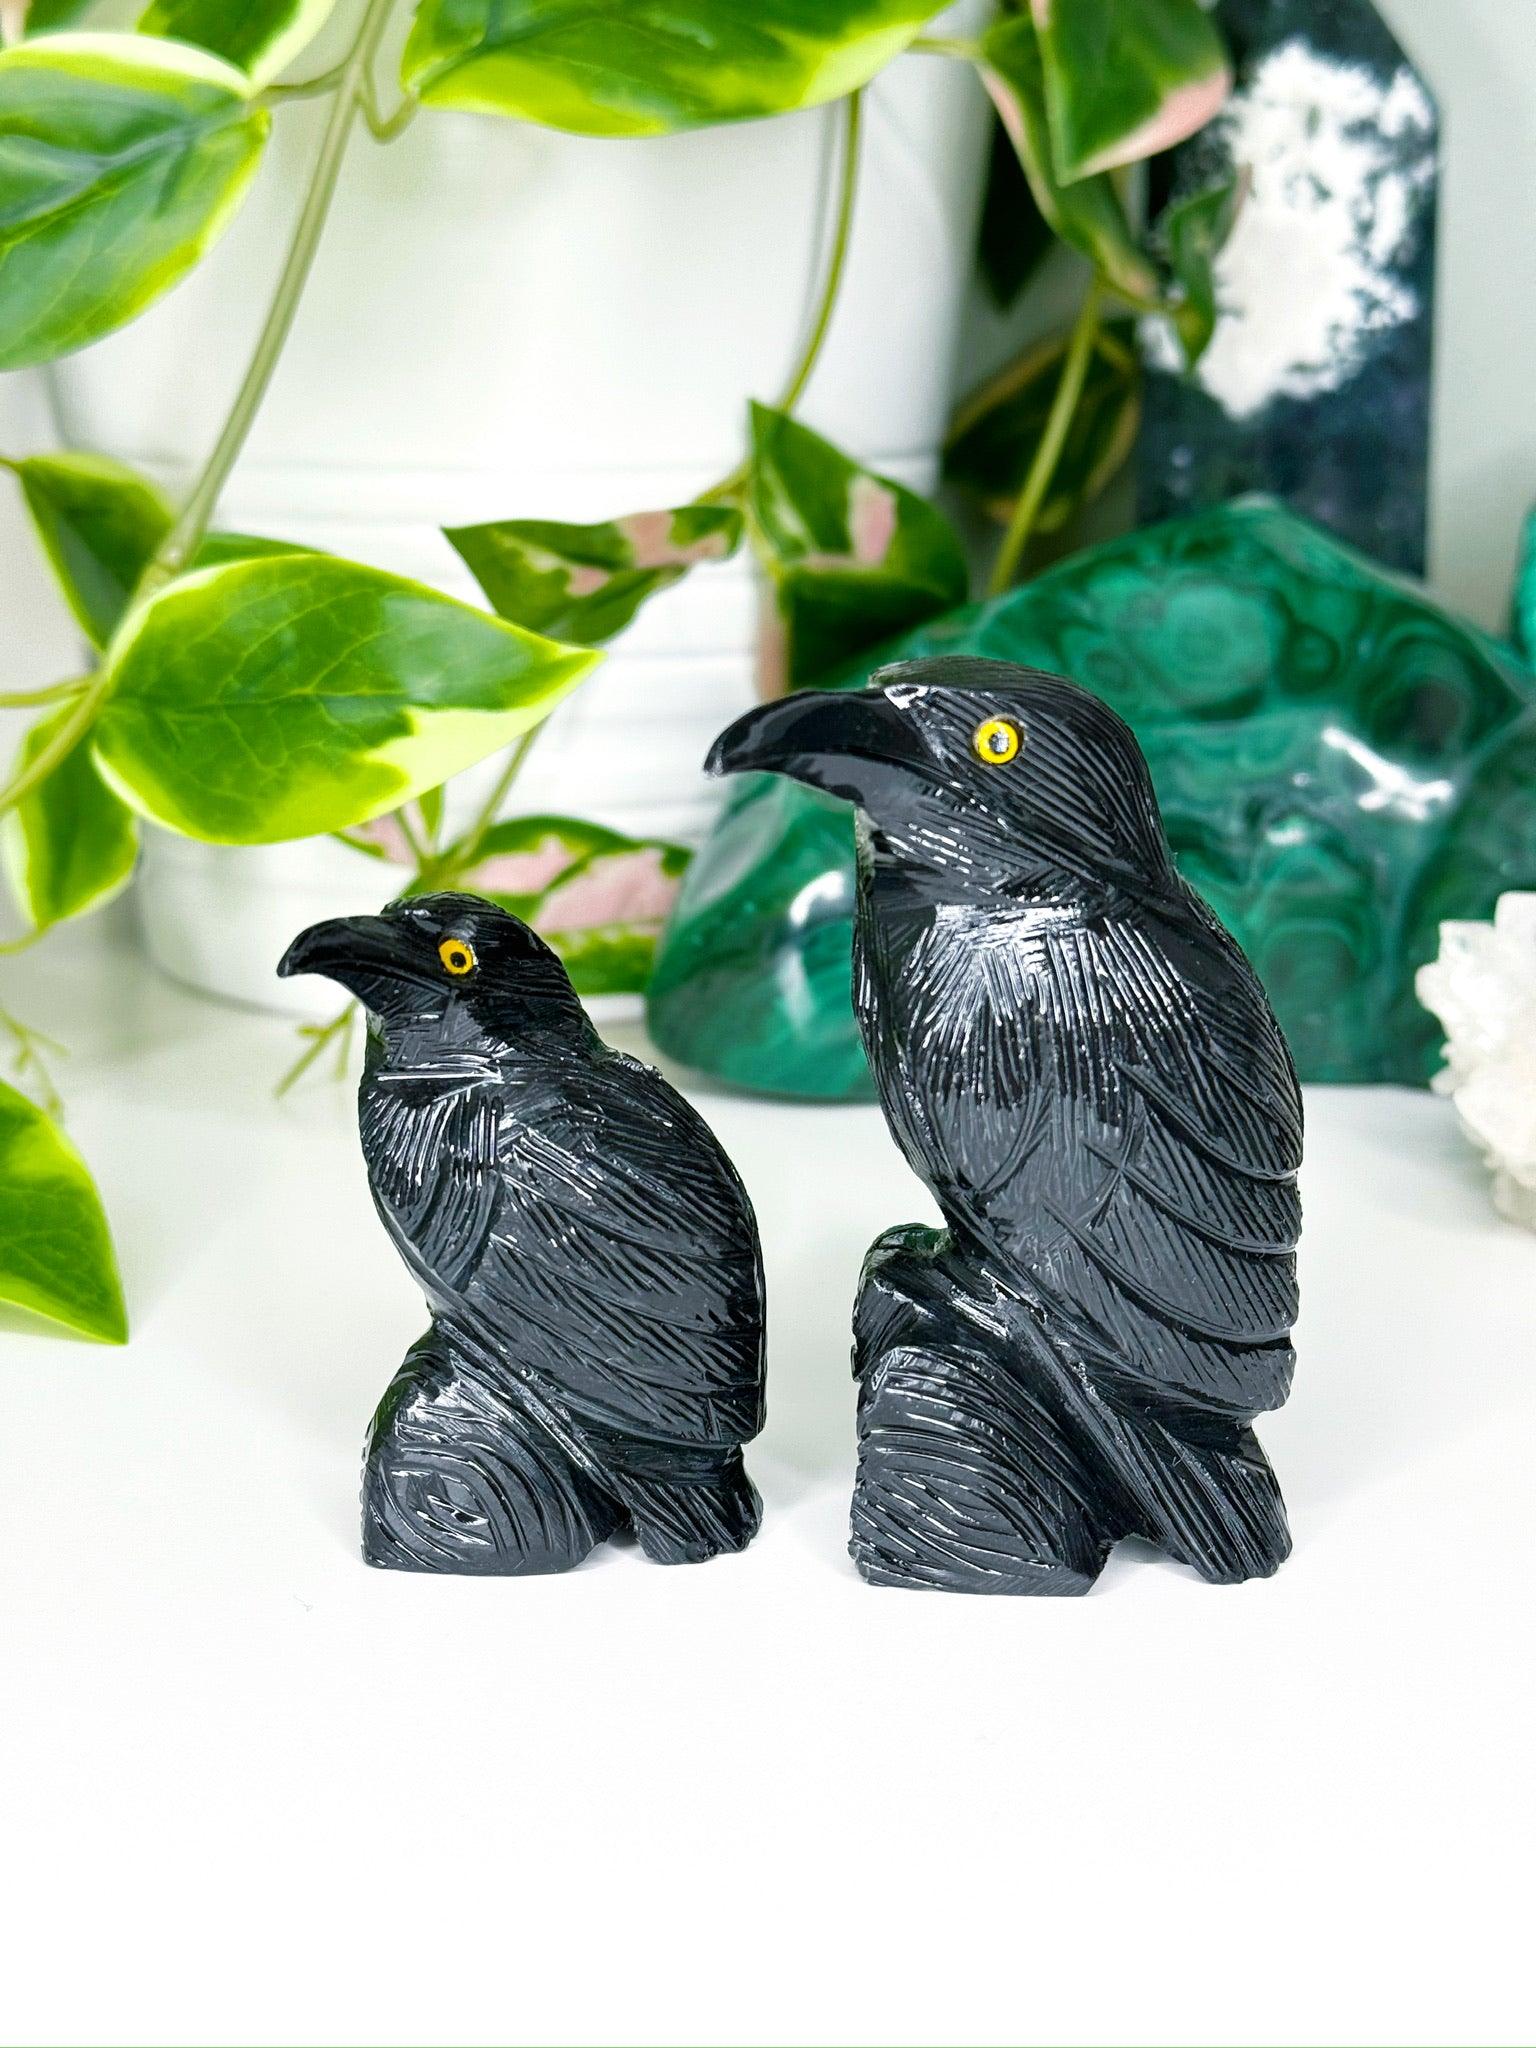 ONYX RAVEN - black onyx, crow, Friday the 13th, holiday sale, onyx, polished, polished stone, raven, recently added - The Mineral Maven